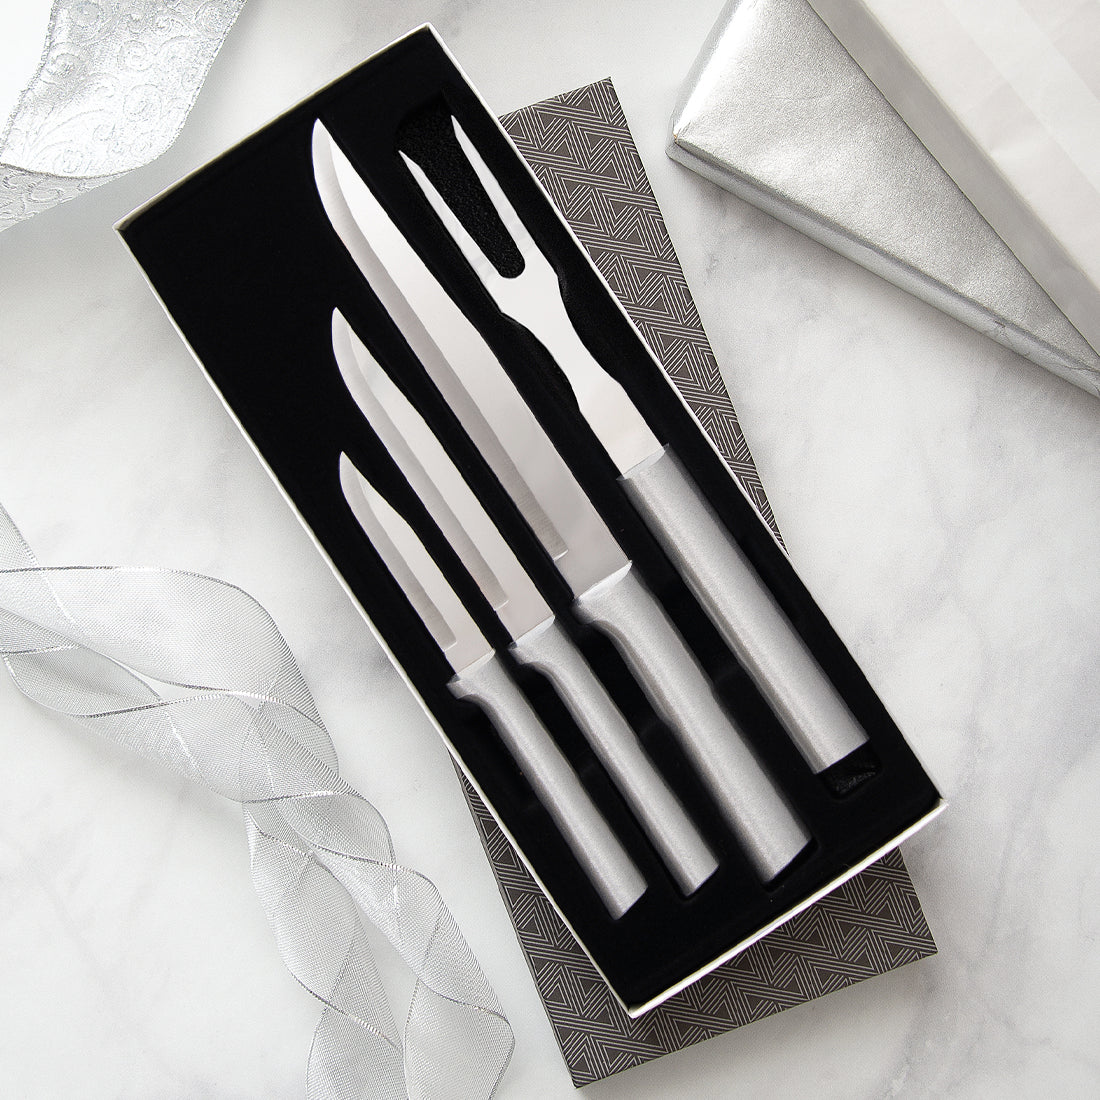 Prepare Then Carve Gift Set (three knives and a carving fork) with silver handles in a gift box